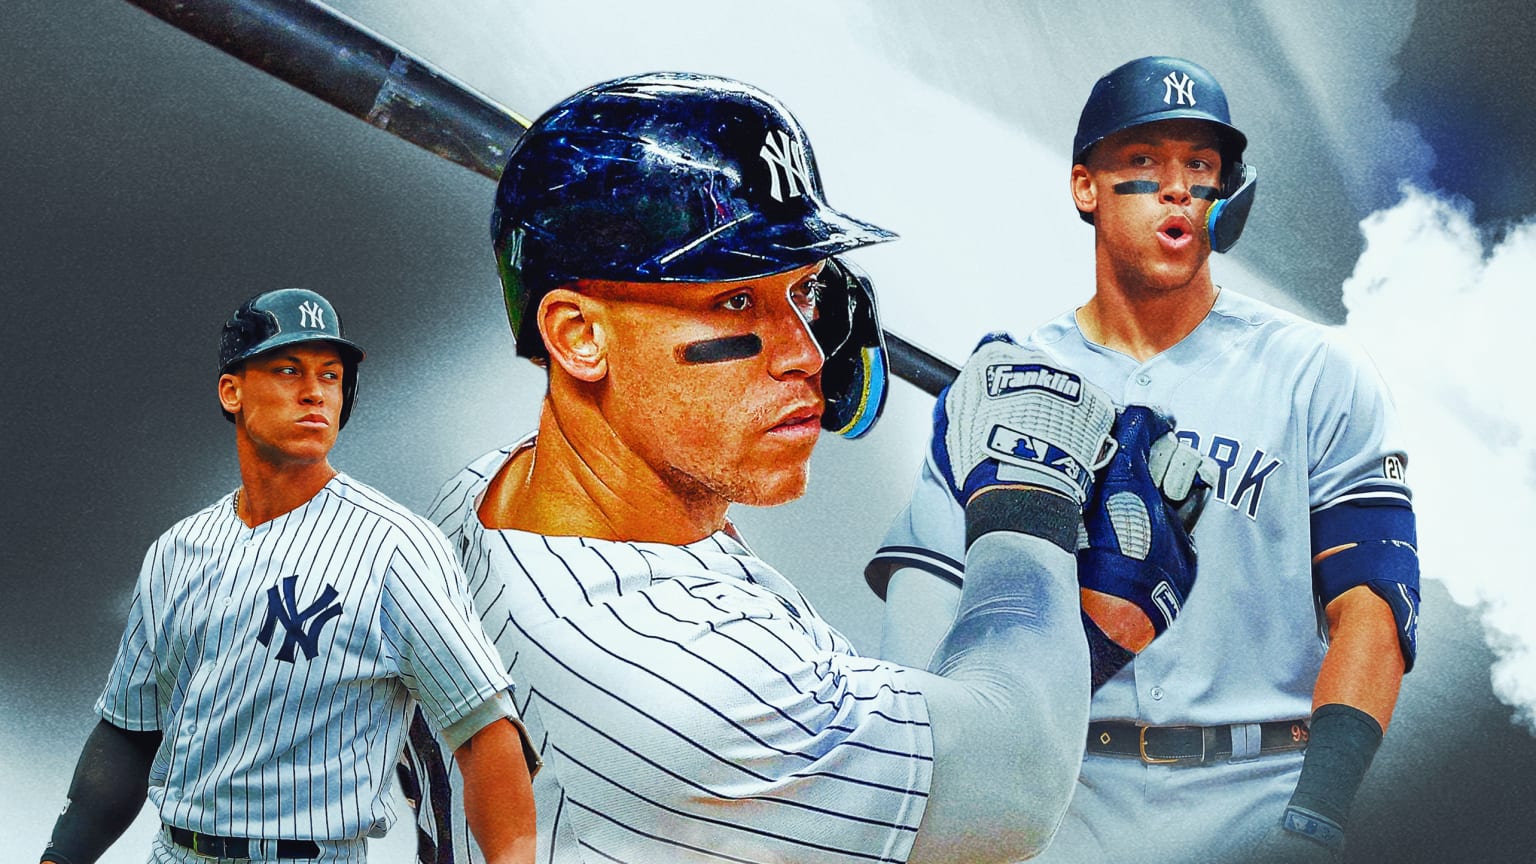 A composite image showing Aaron Judge in 3 poses against a background of fog